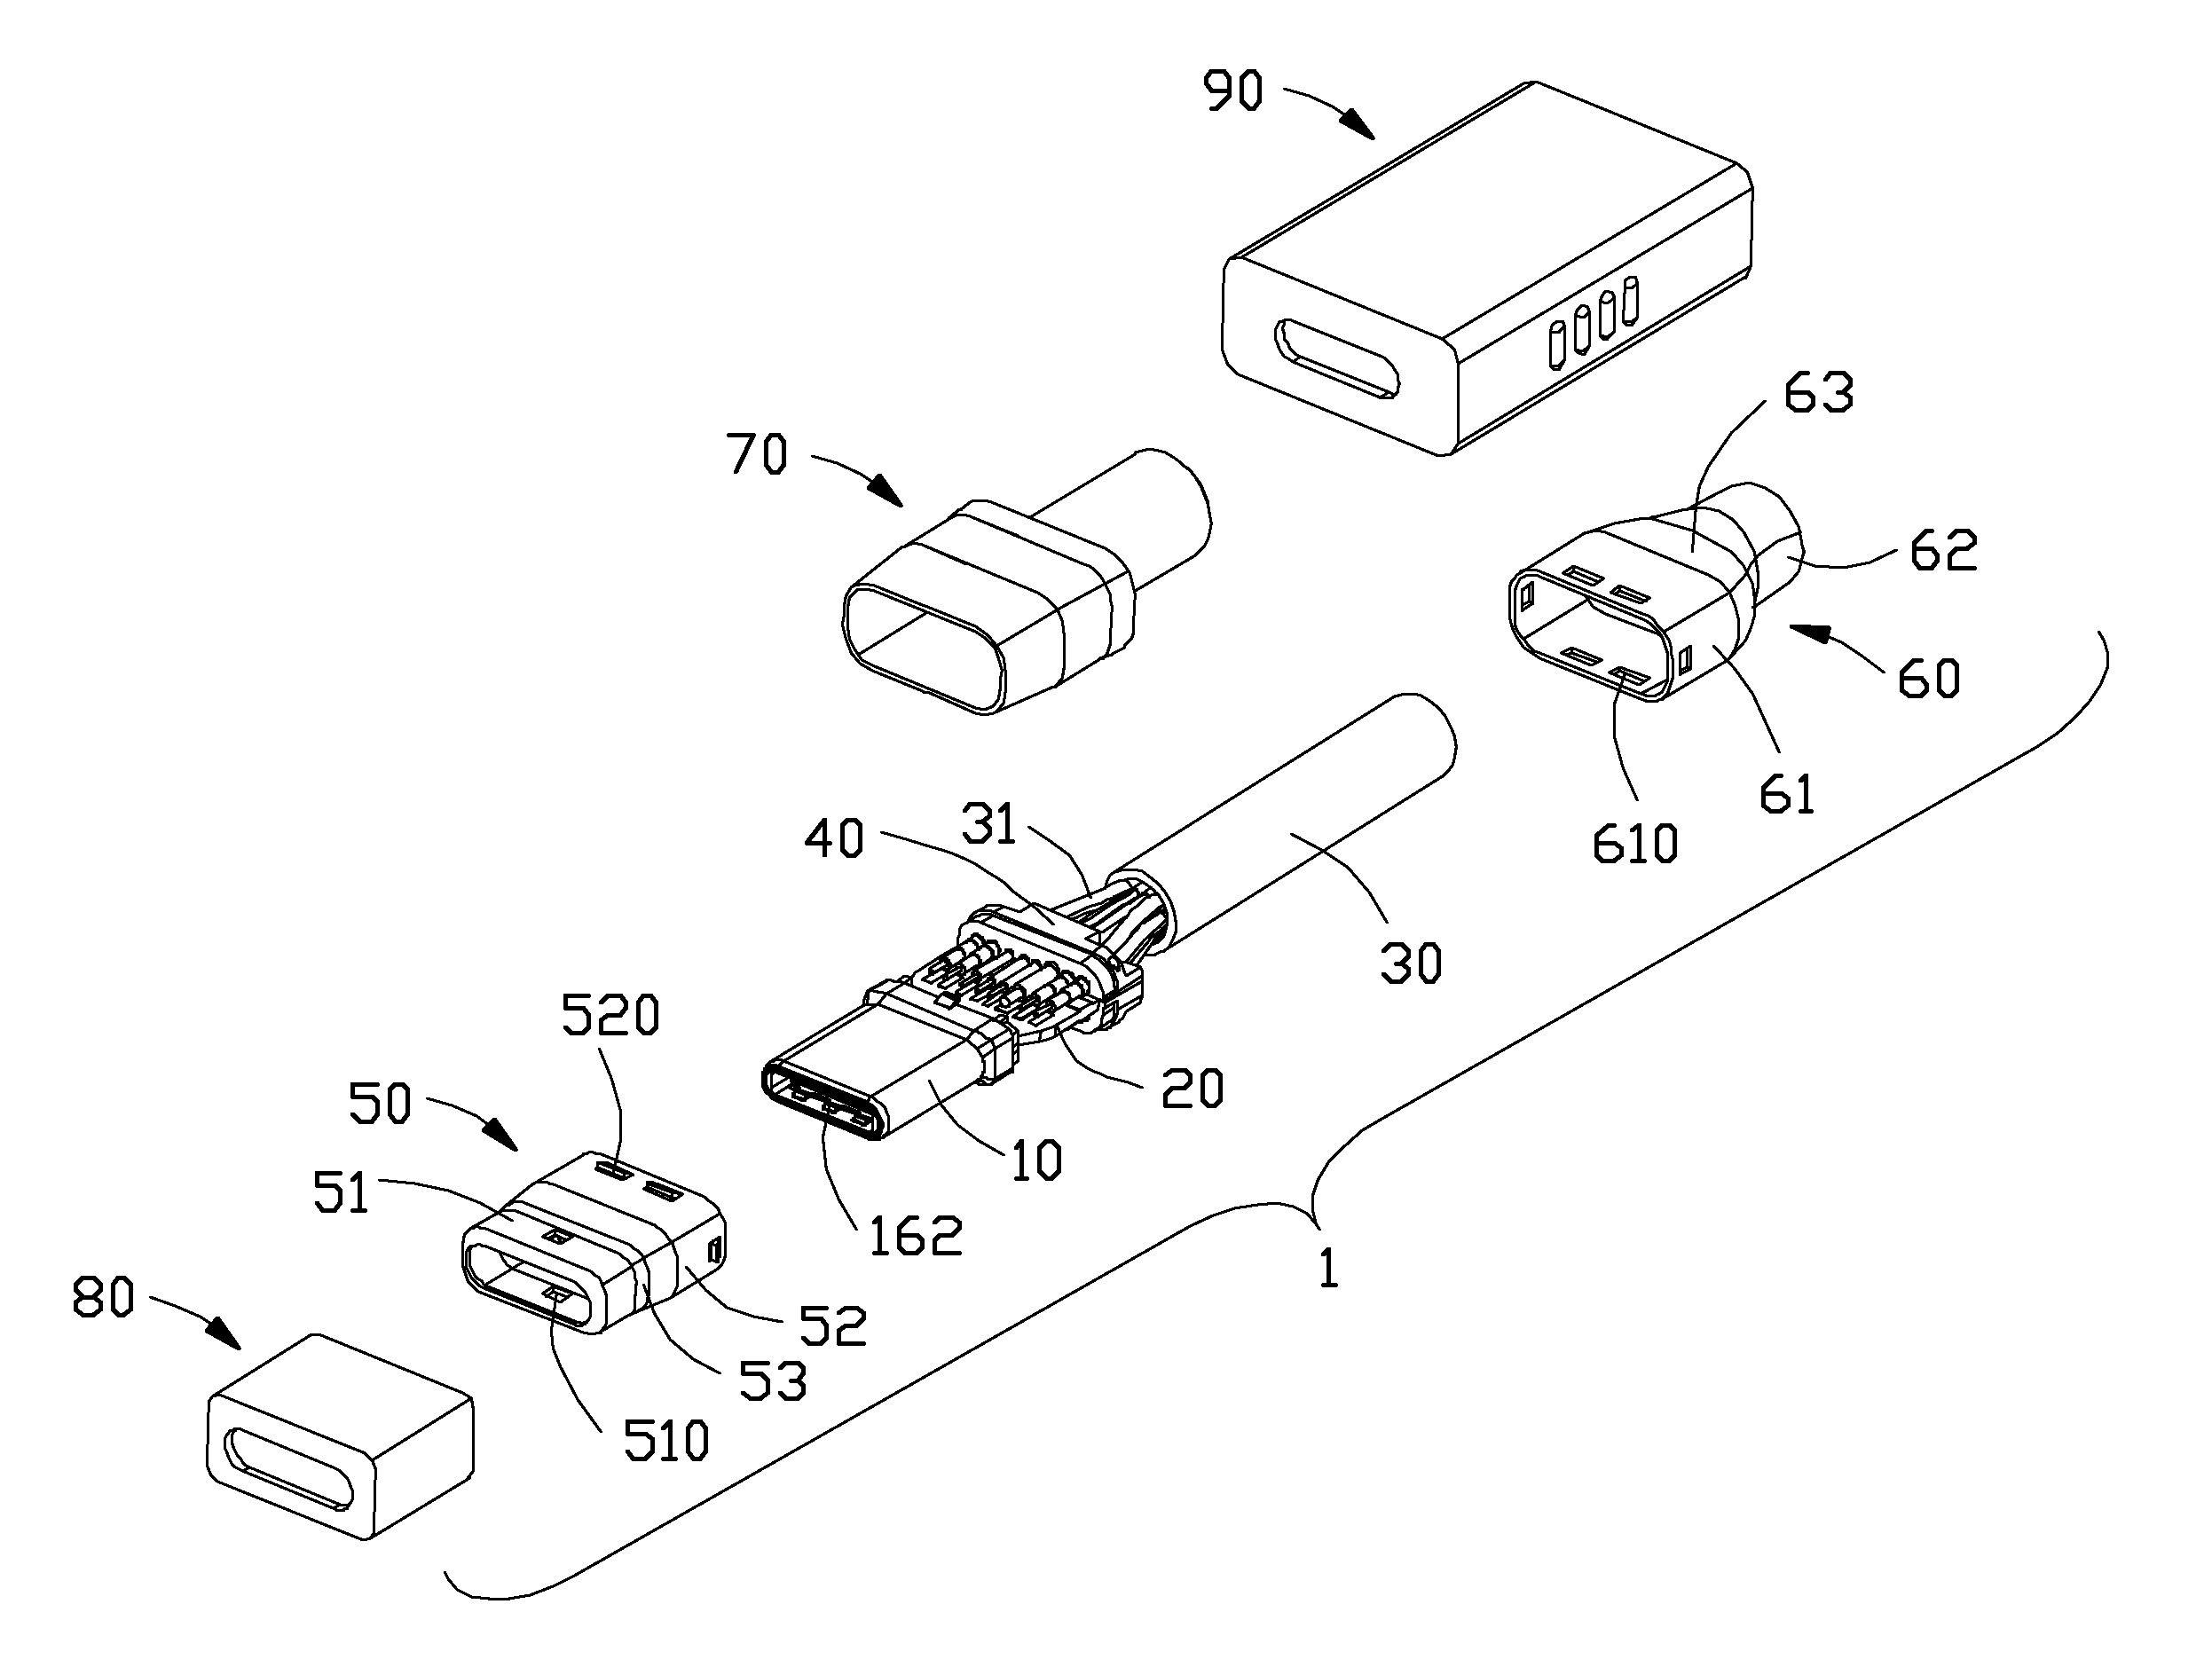 Plug connector assembly having improved Anti-emi performance